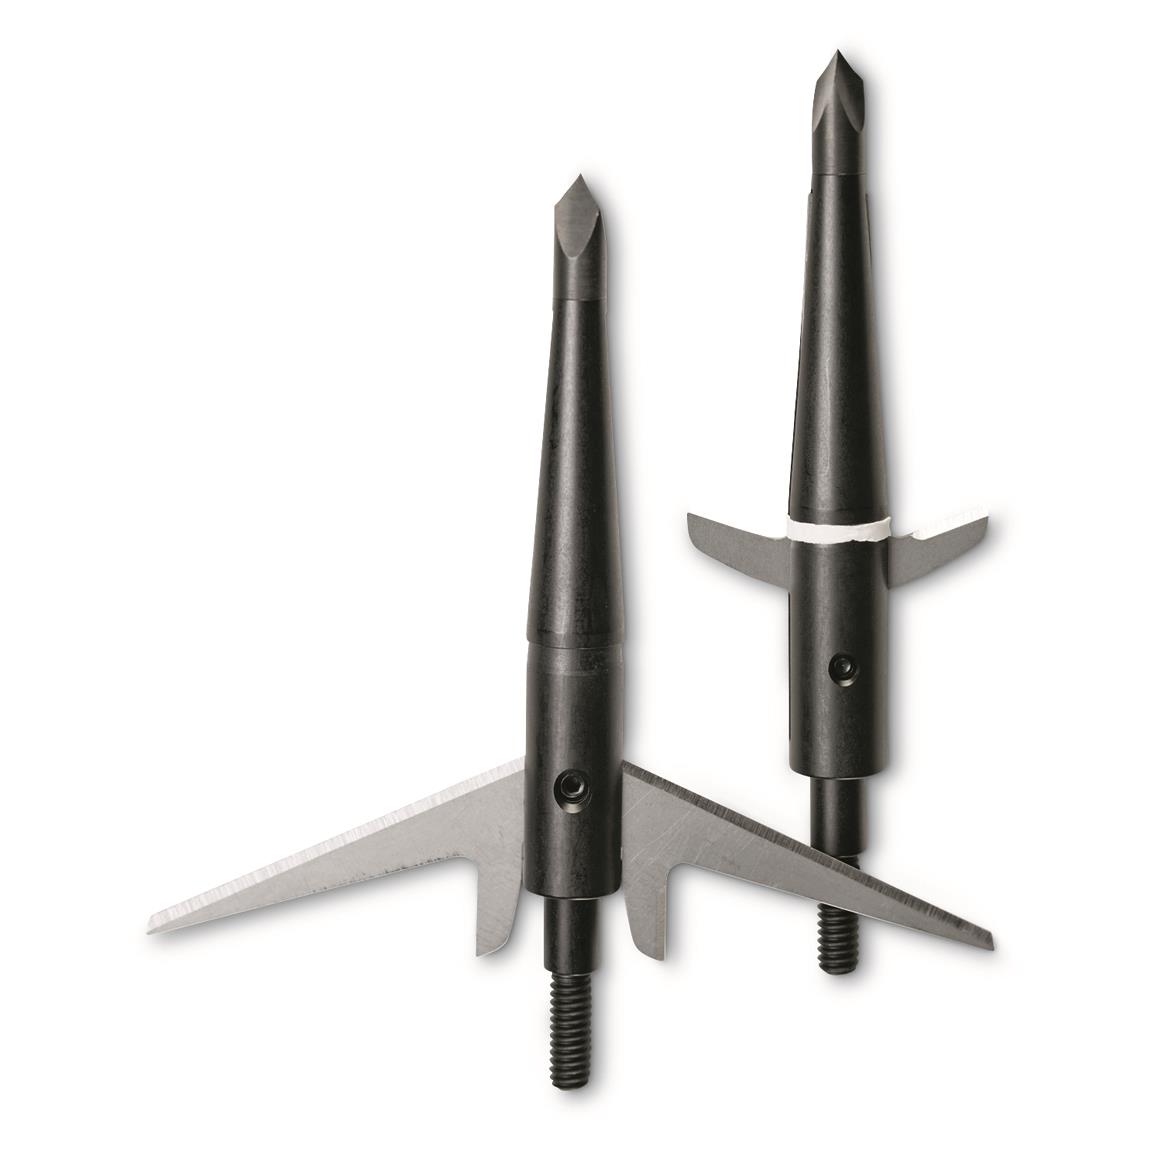 Swhacker 2 Blade Expandable Crossbow Broadheads, 150 Grain, 3&quot; Cut, 3 Pack